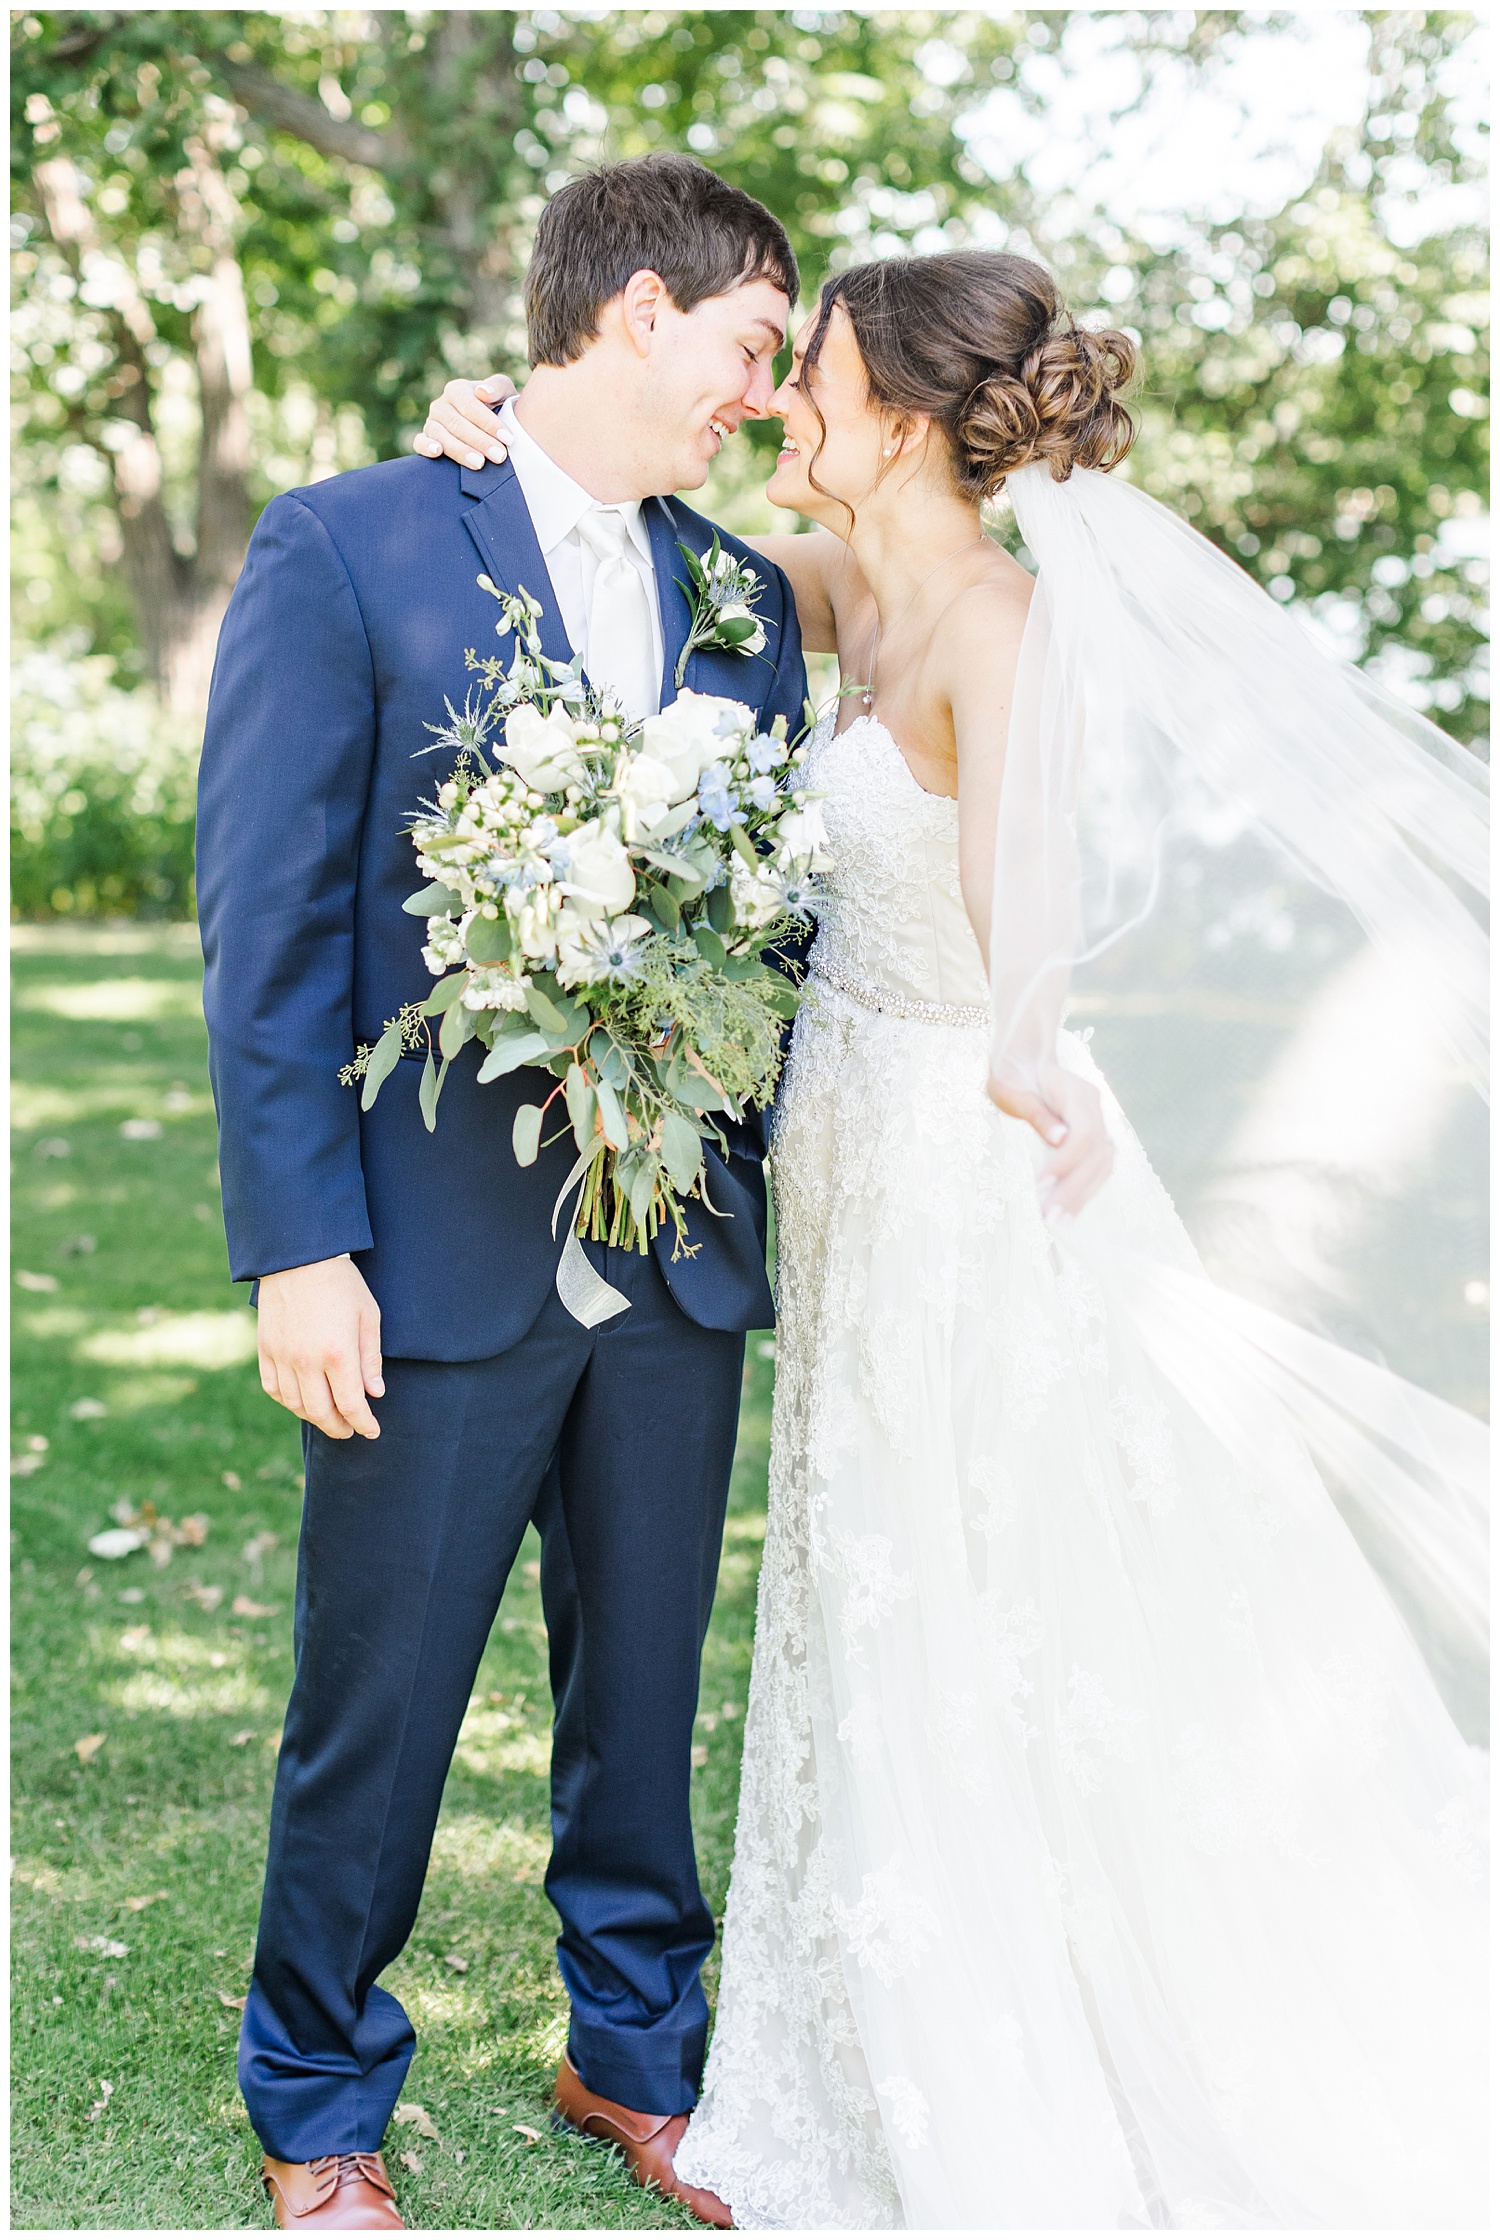 Bride and groom embrace and laugh while her veil blows in the wind | CB Studio